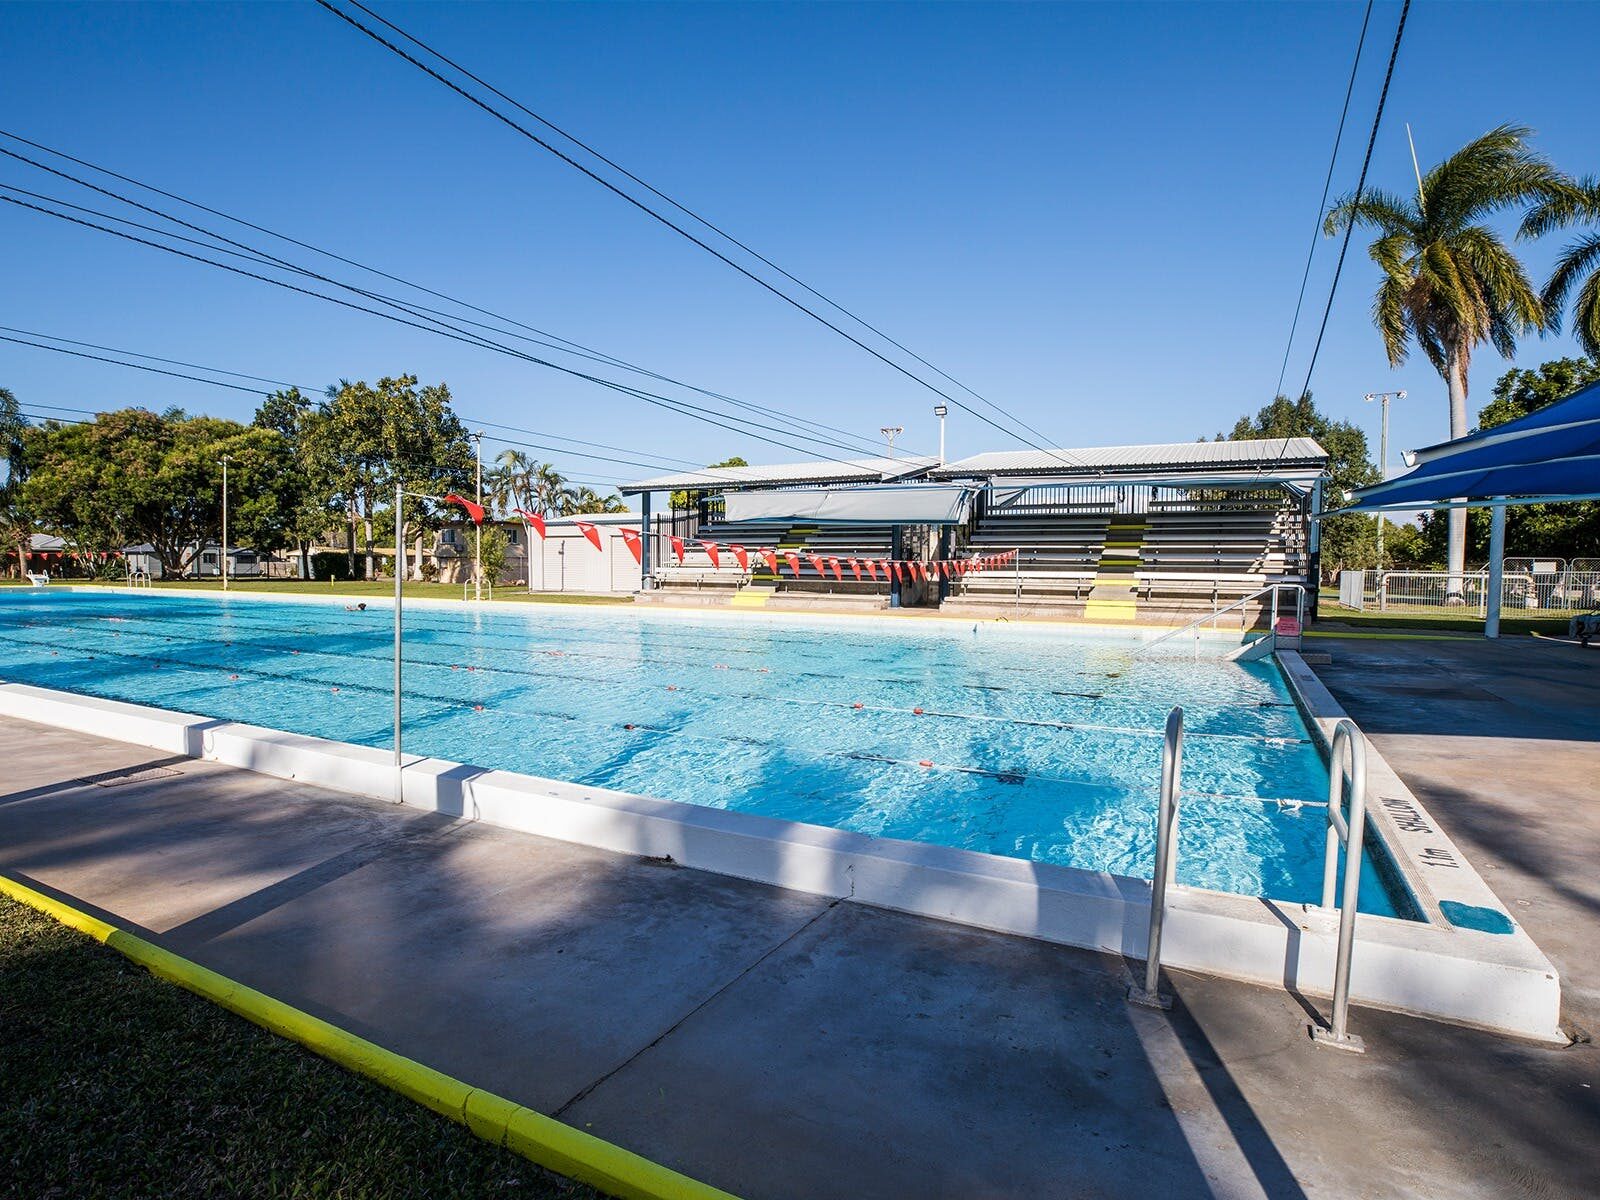 Home Hill Swimming Pool